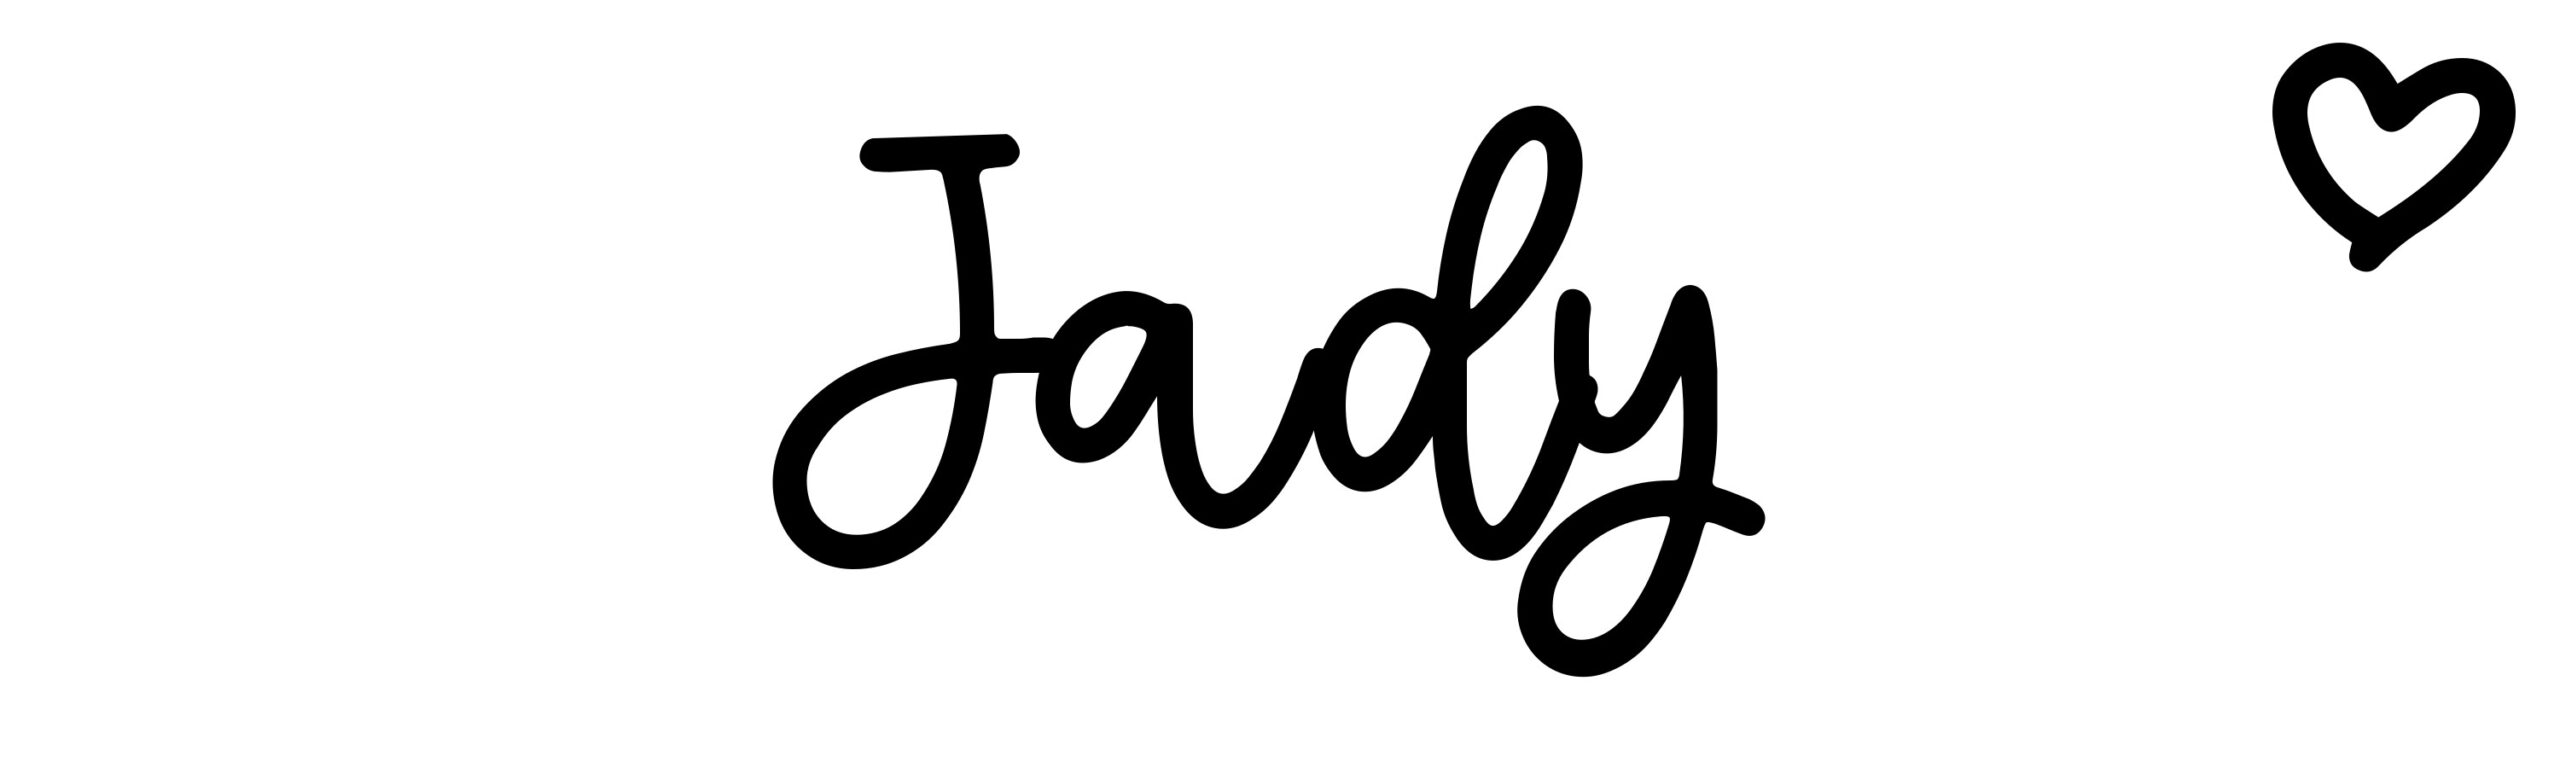 Jady software comes with apple macbook pro